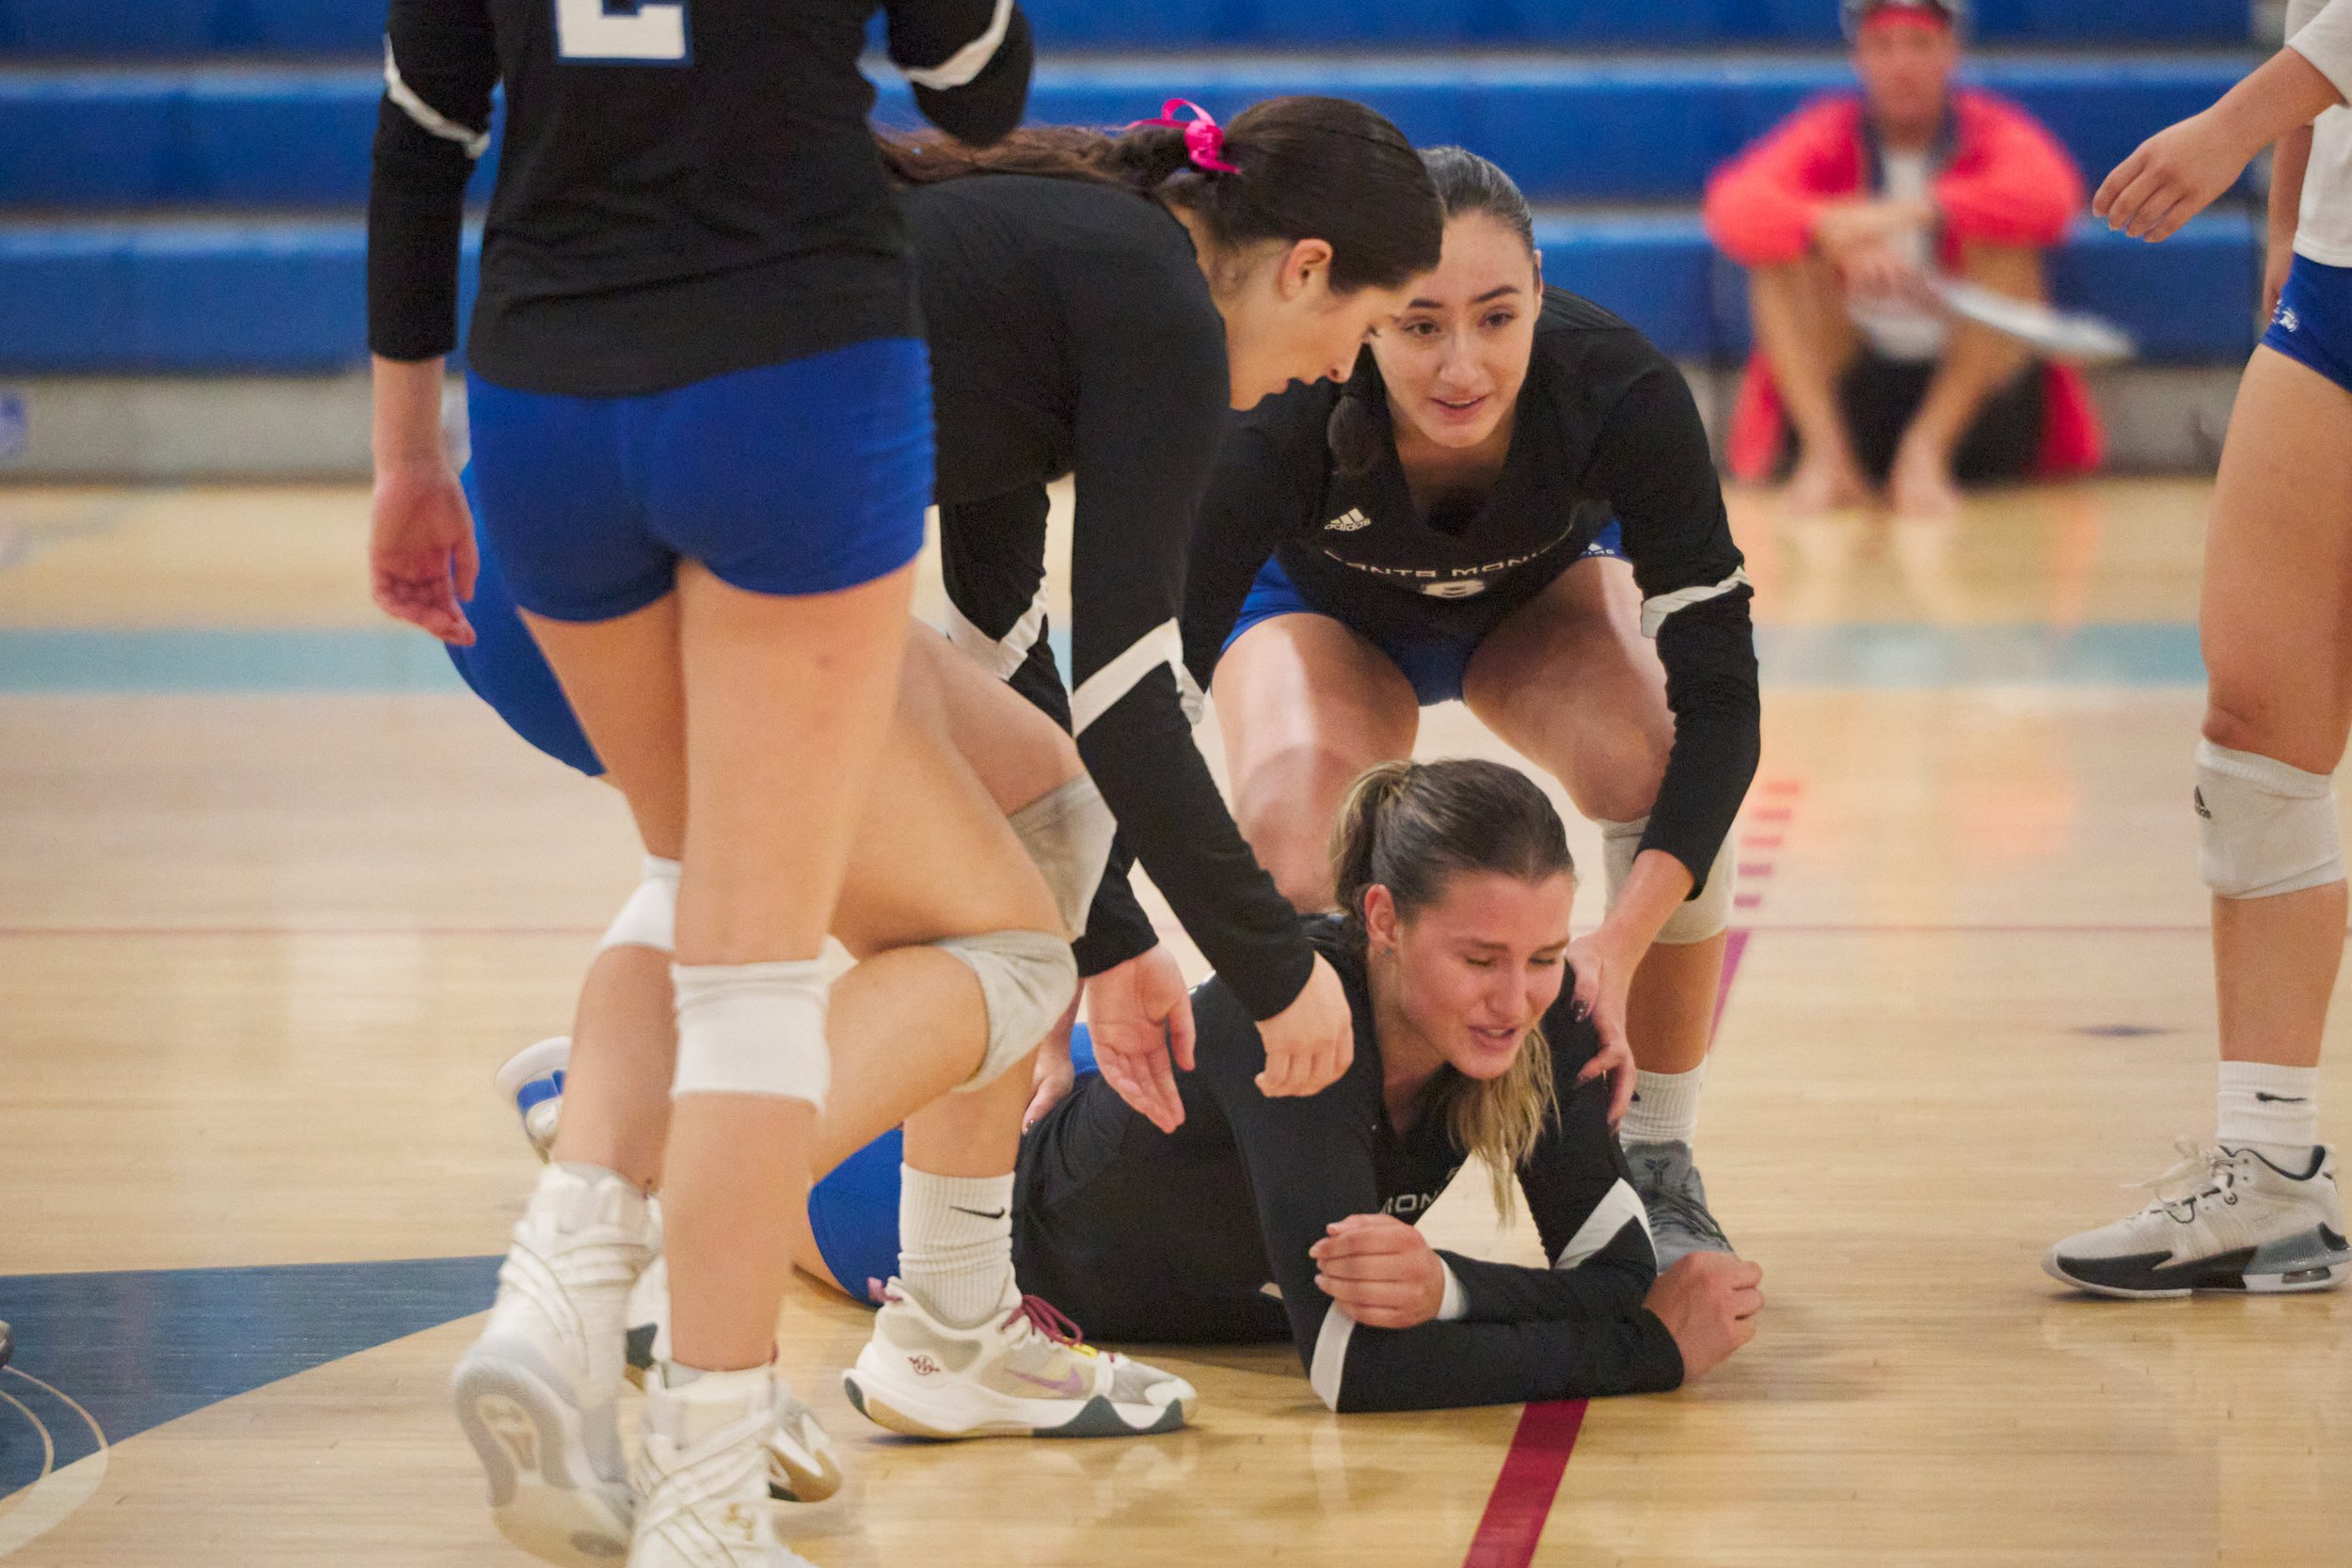  "She got me!" Mia Paulson lies on the floor, being assisted by Maiella Riva and Natalie Fernandez, after getting smacked in the face with the ball during the women's volleyball match against the College of the Canyons Cougars on Friday, Oct. 27, 202